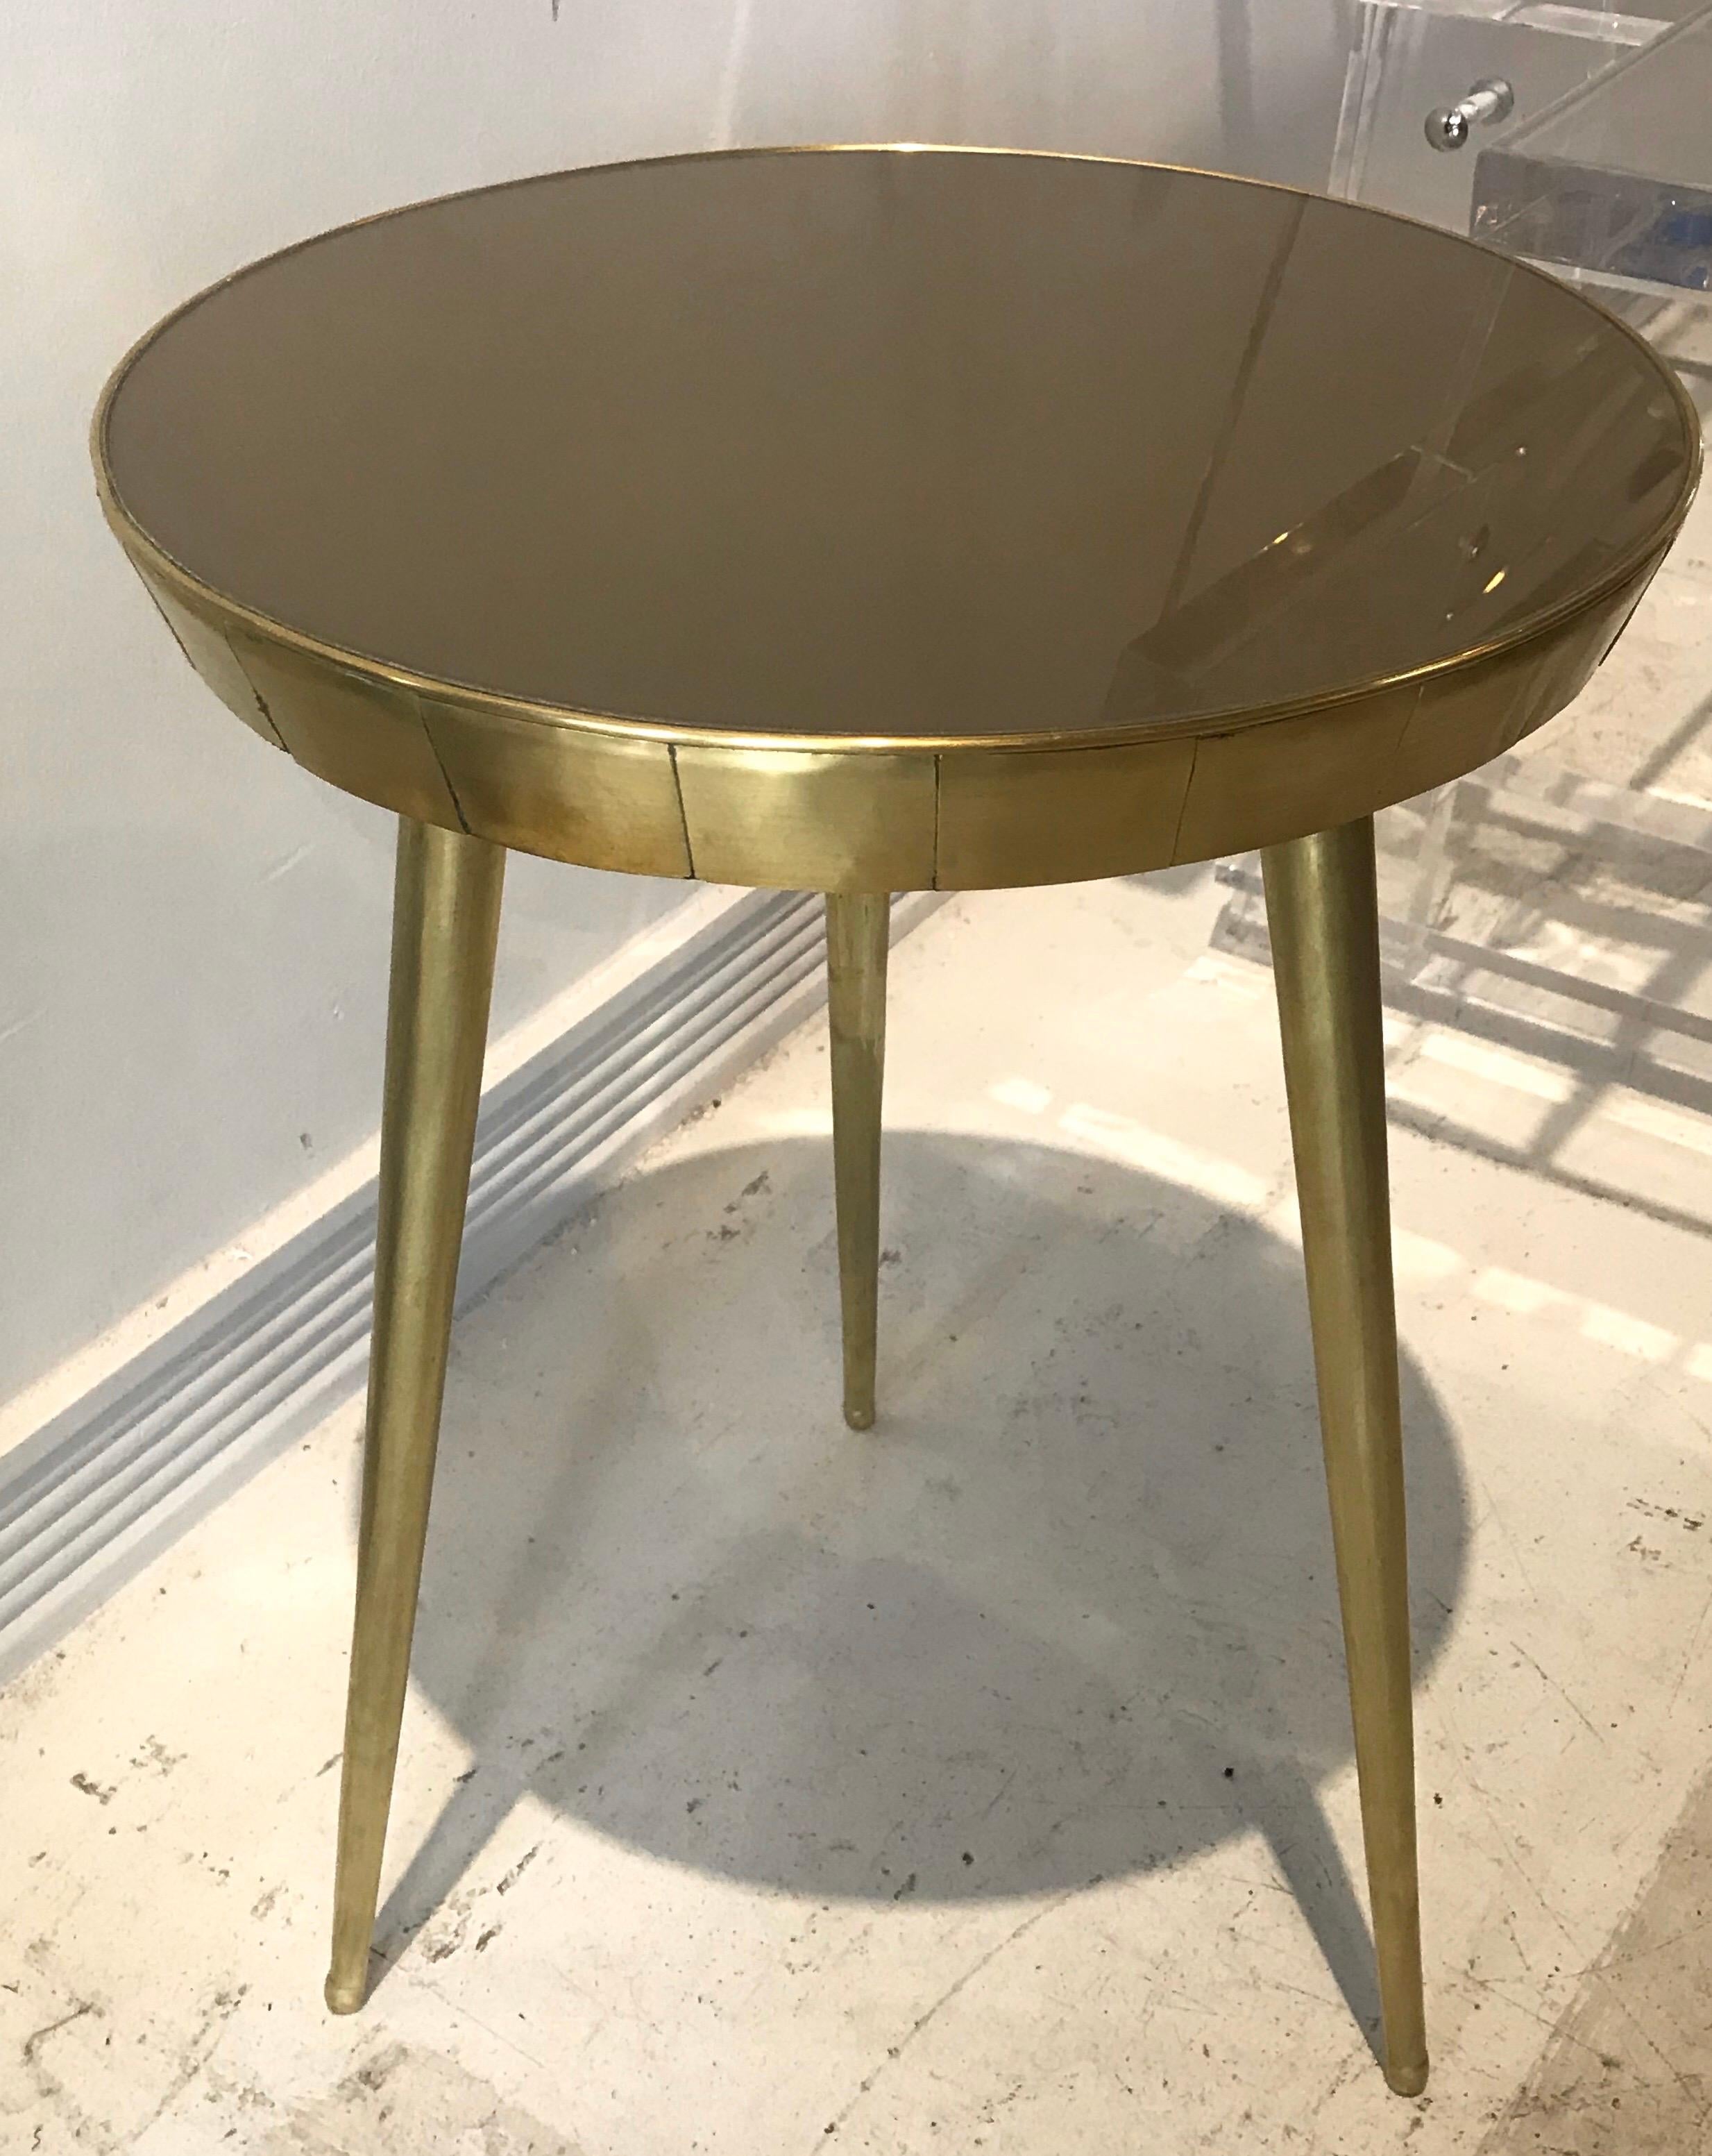 A pair of chic reverse painted (taupe colored) glass and brass Italian side tables.